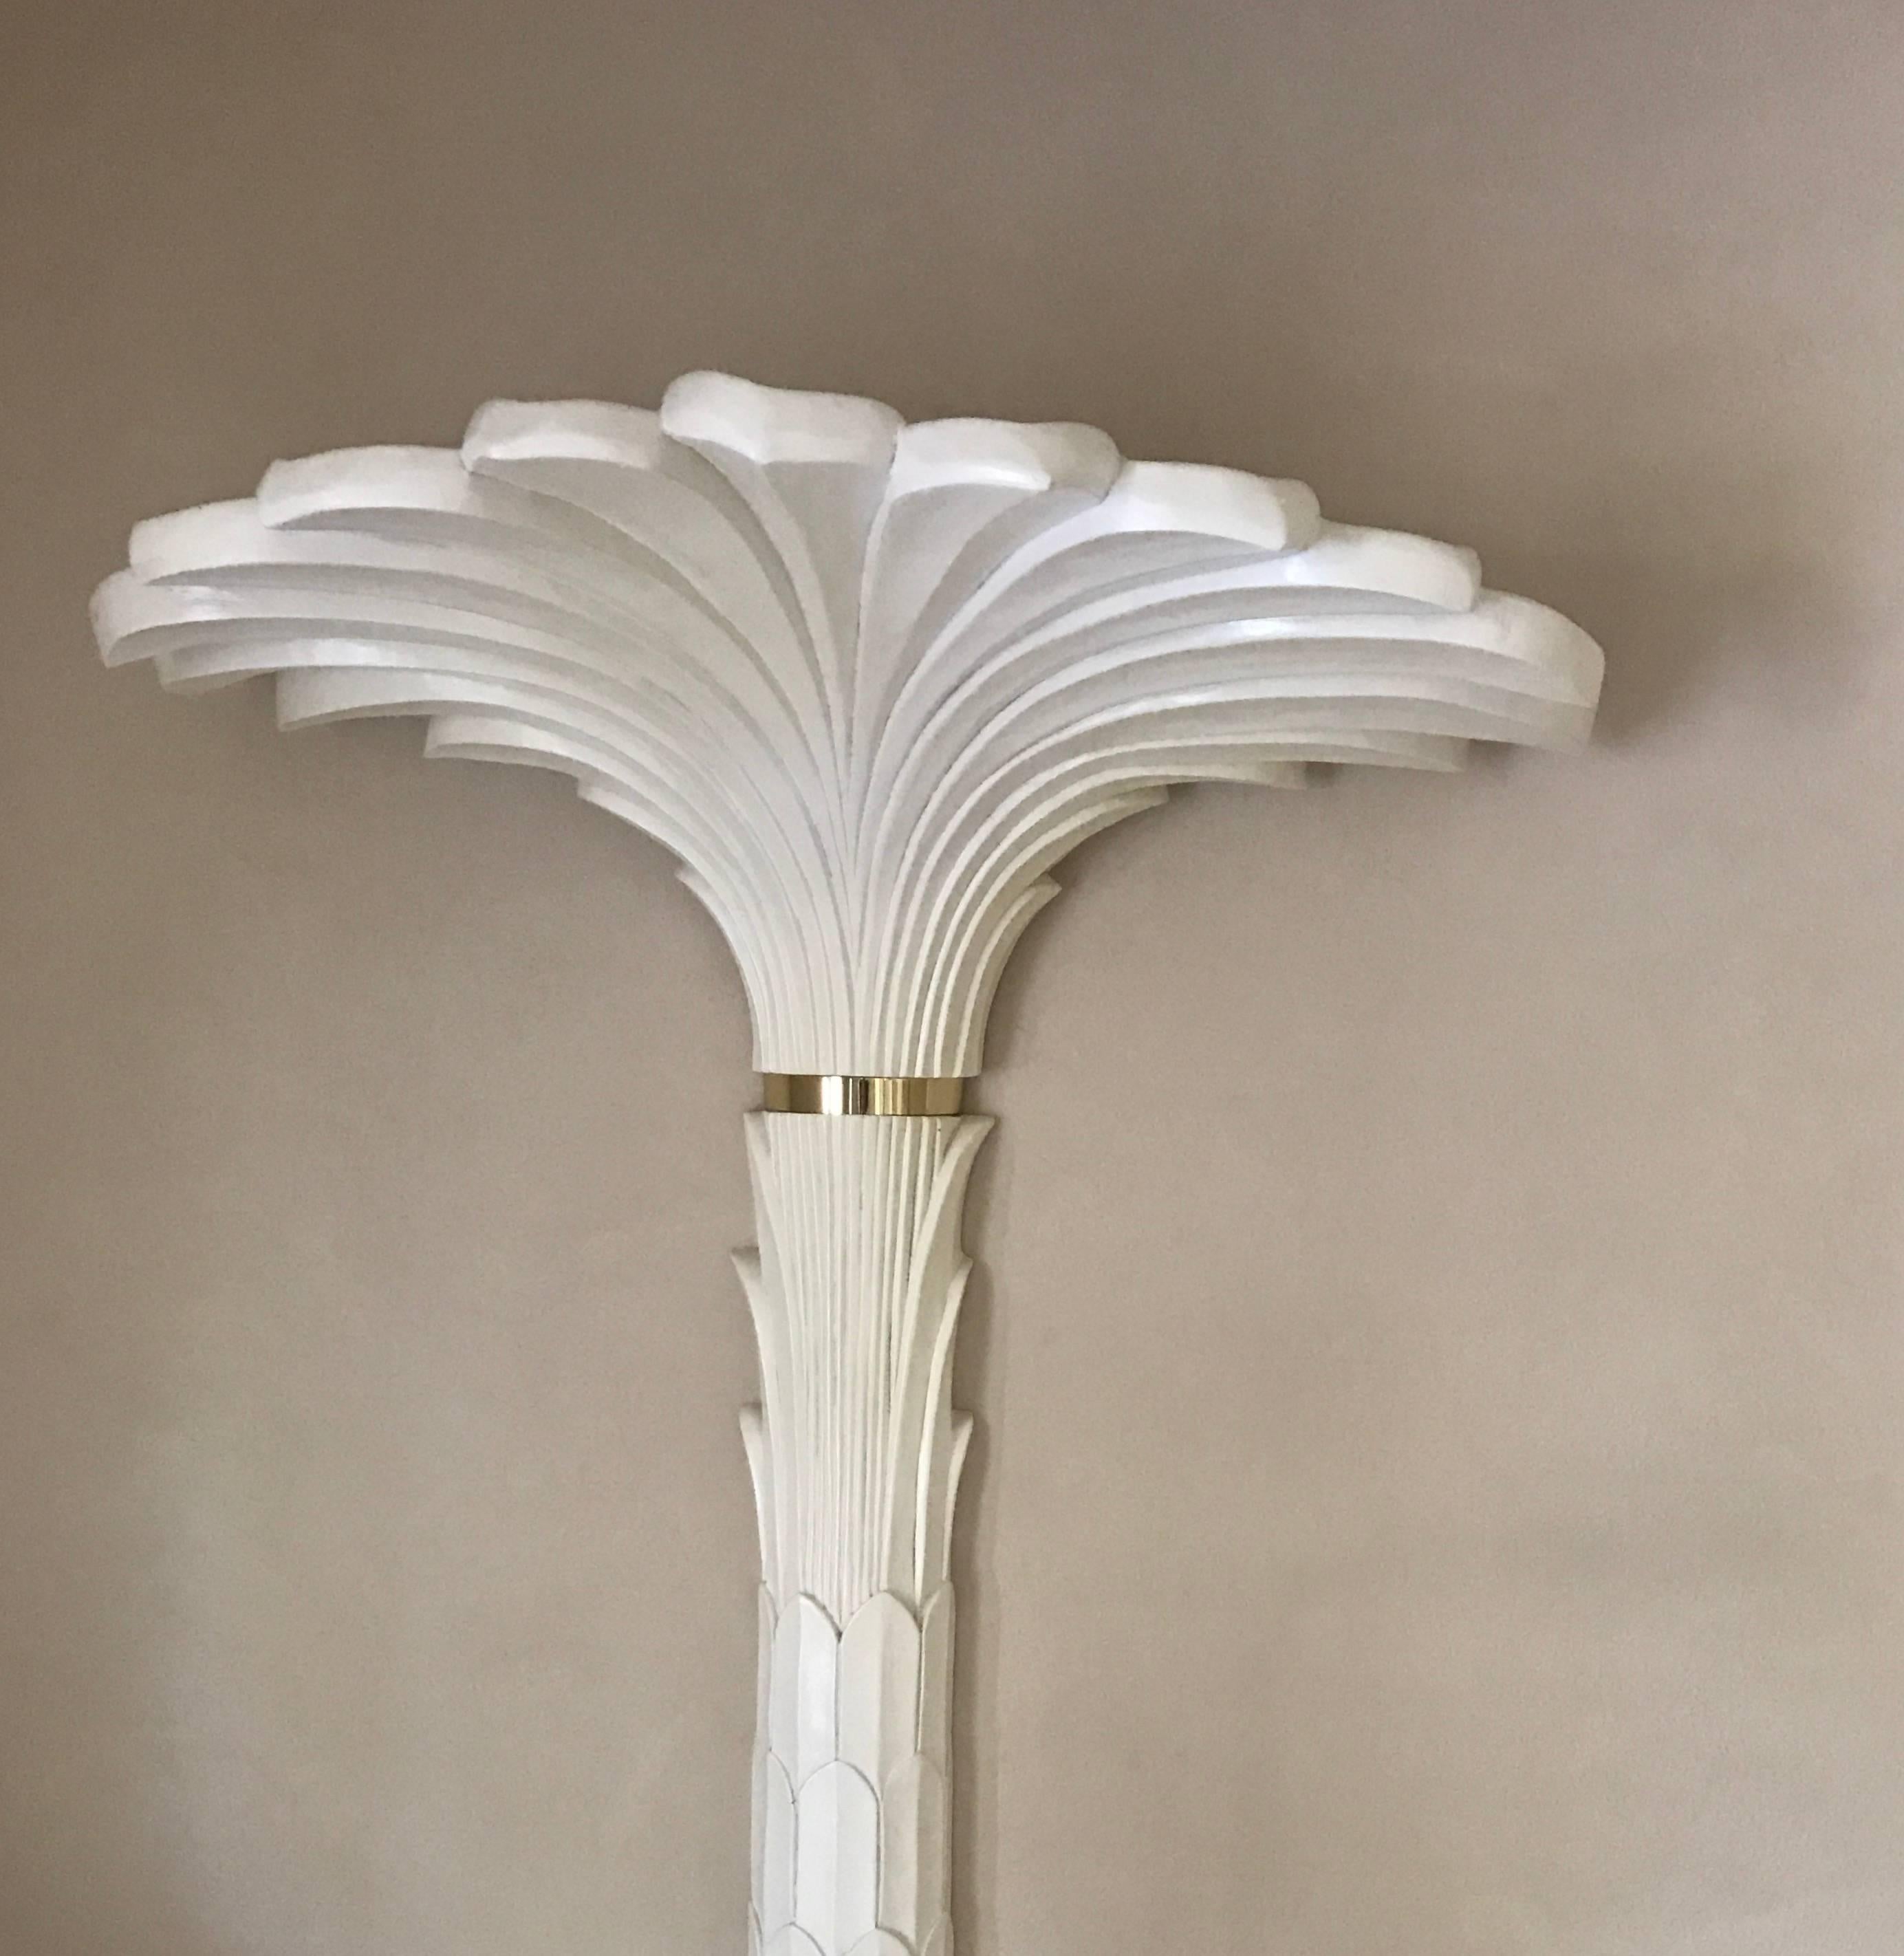 Late 20th Century Pair of Serge Roche Style Sconces in Stylized Palm Motif